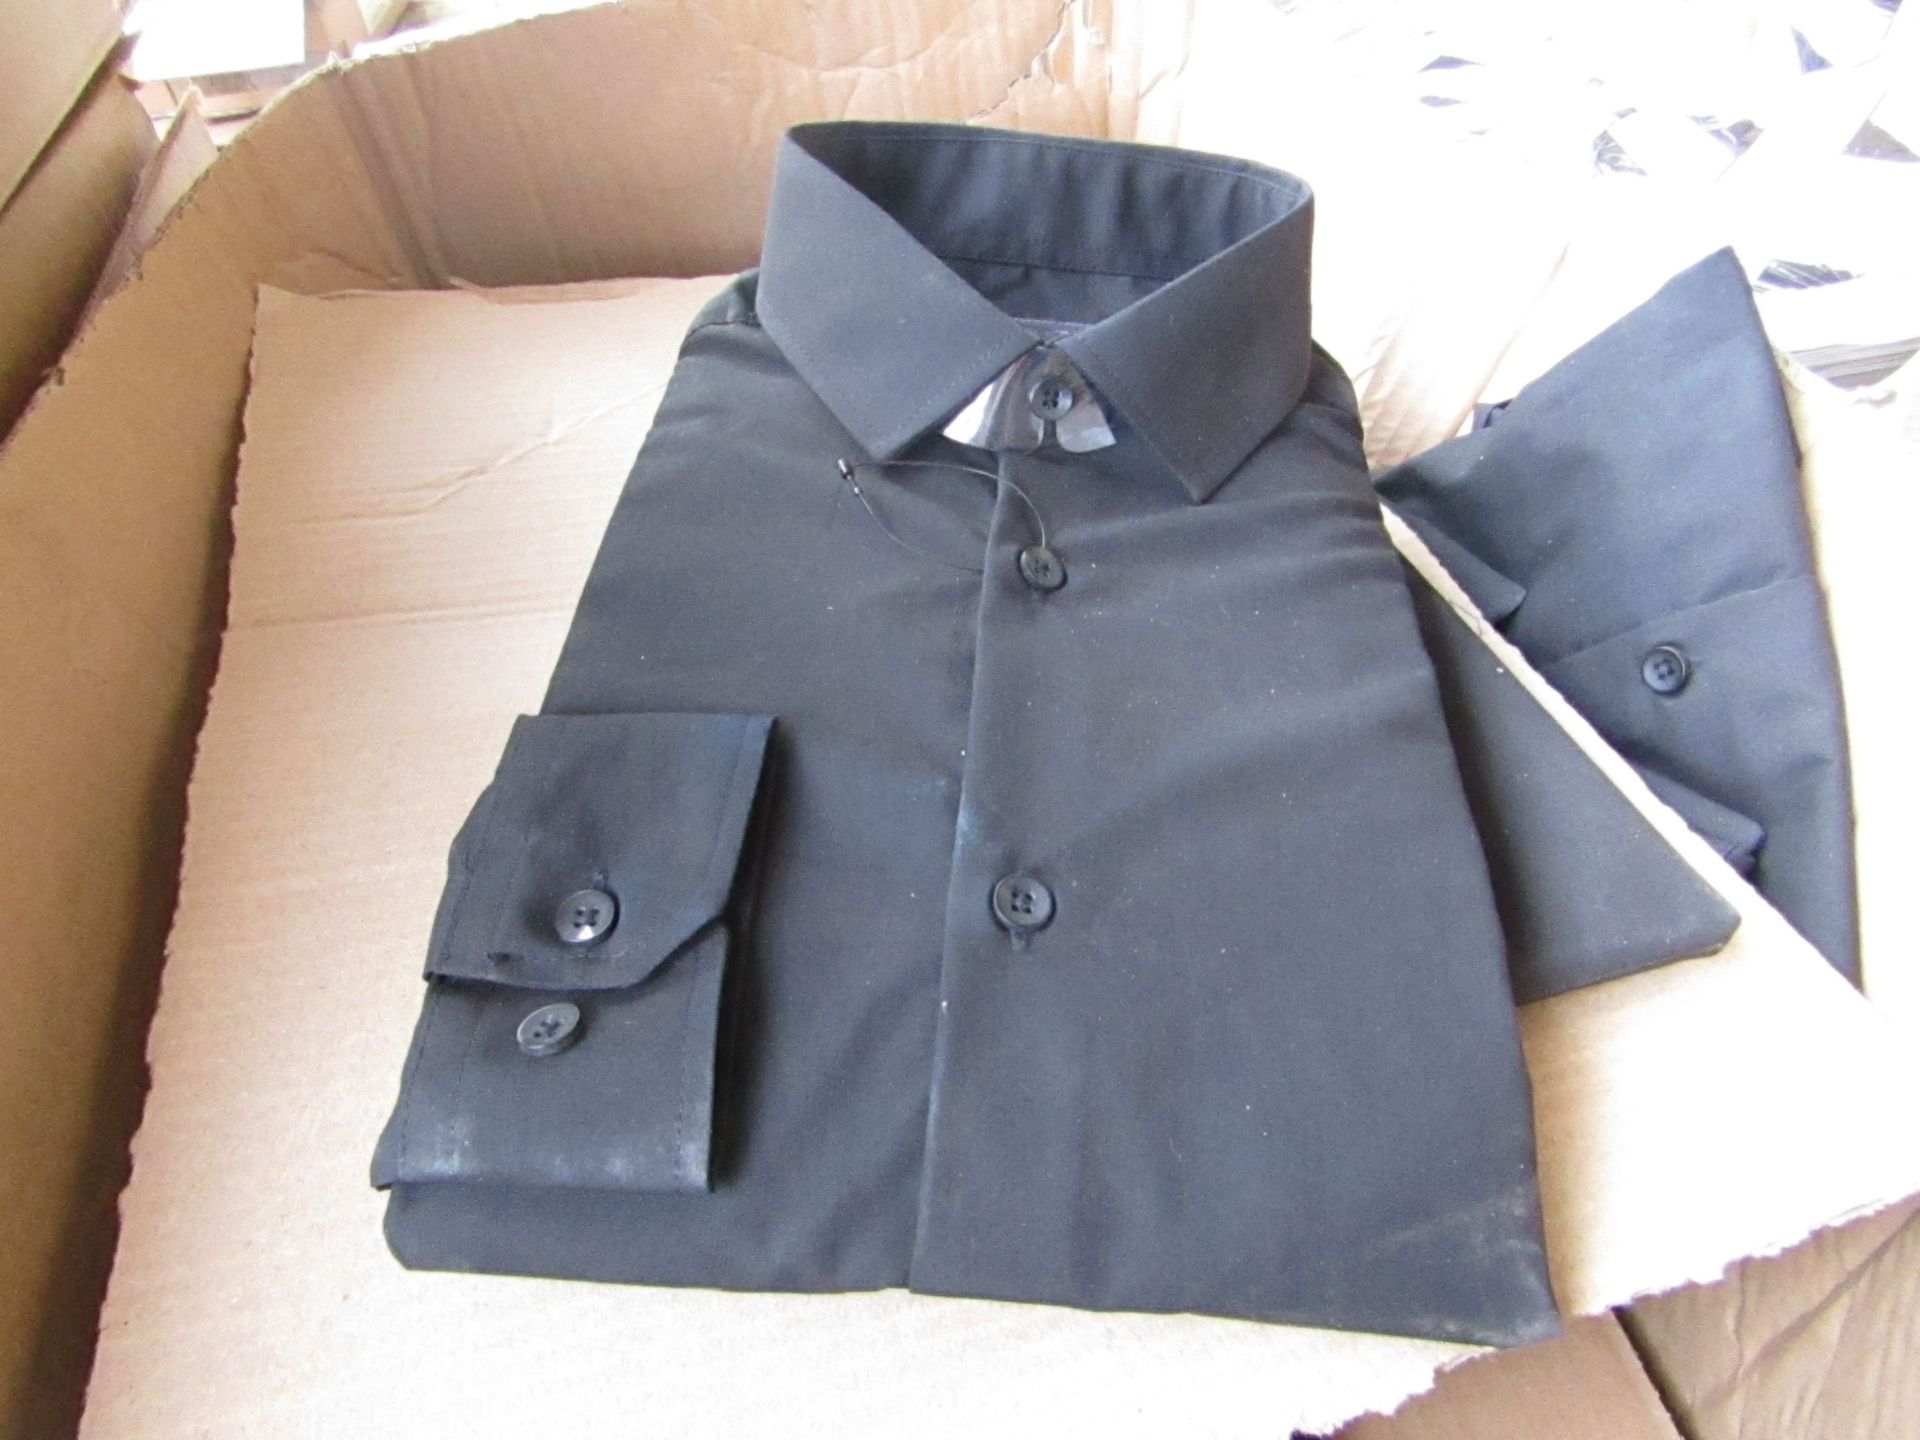 5x Primark formal shirts, size S, slim fit, new.